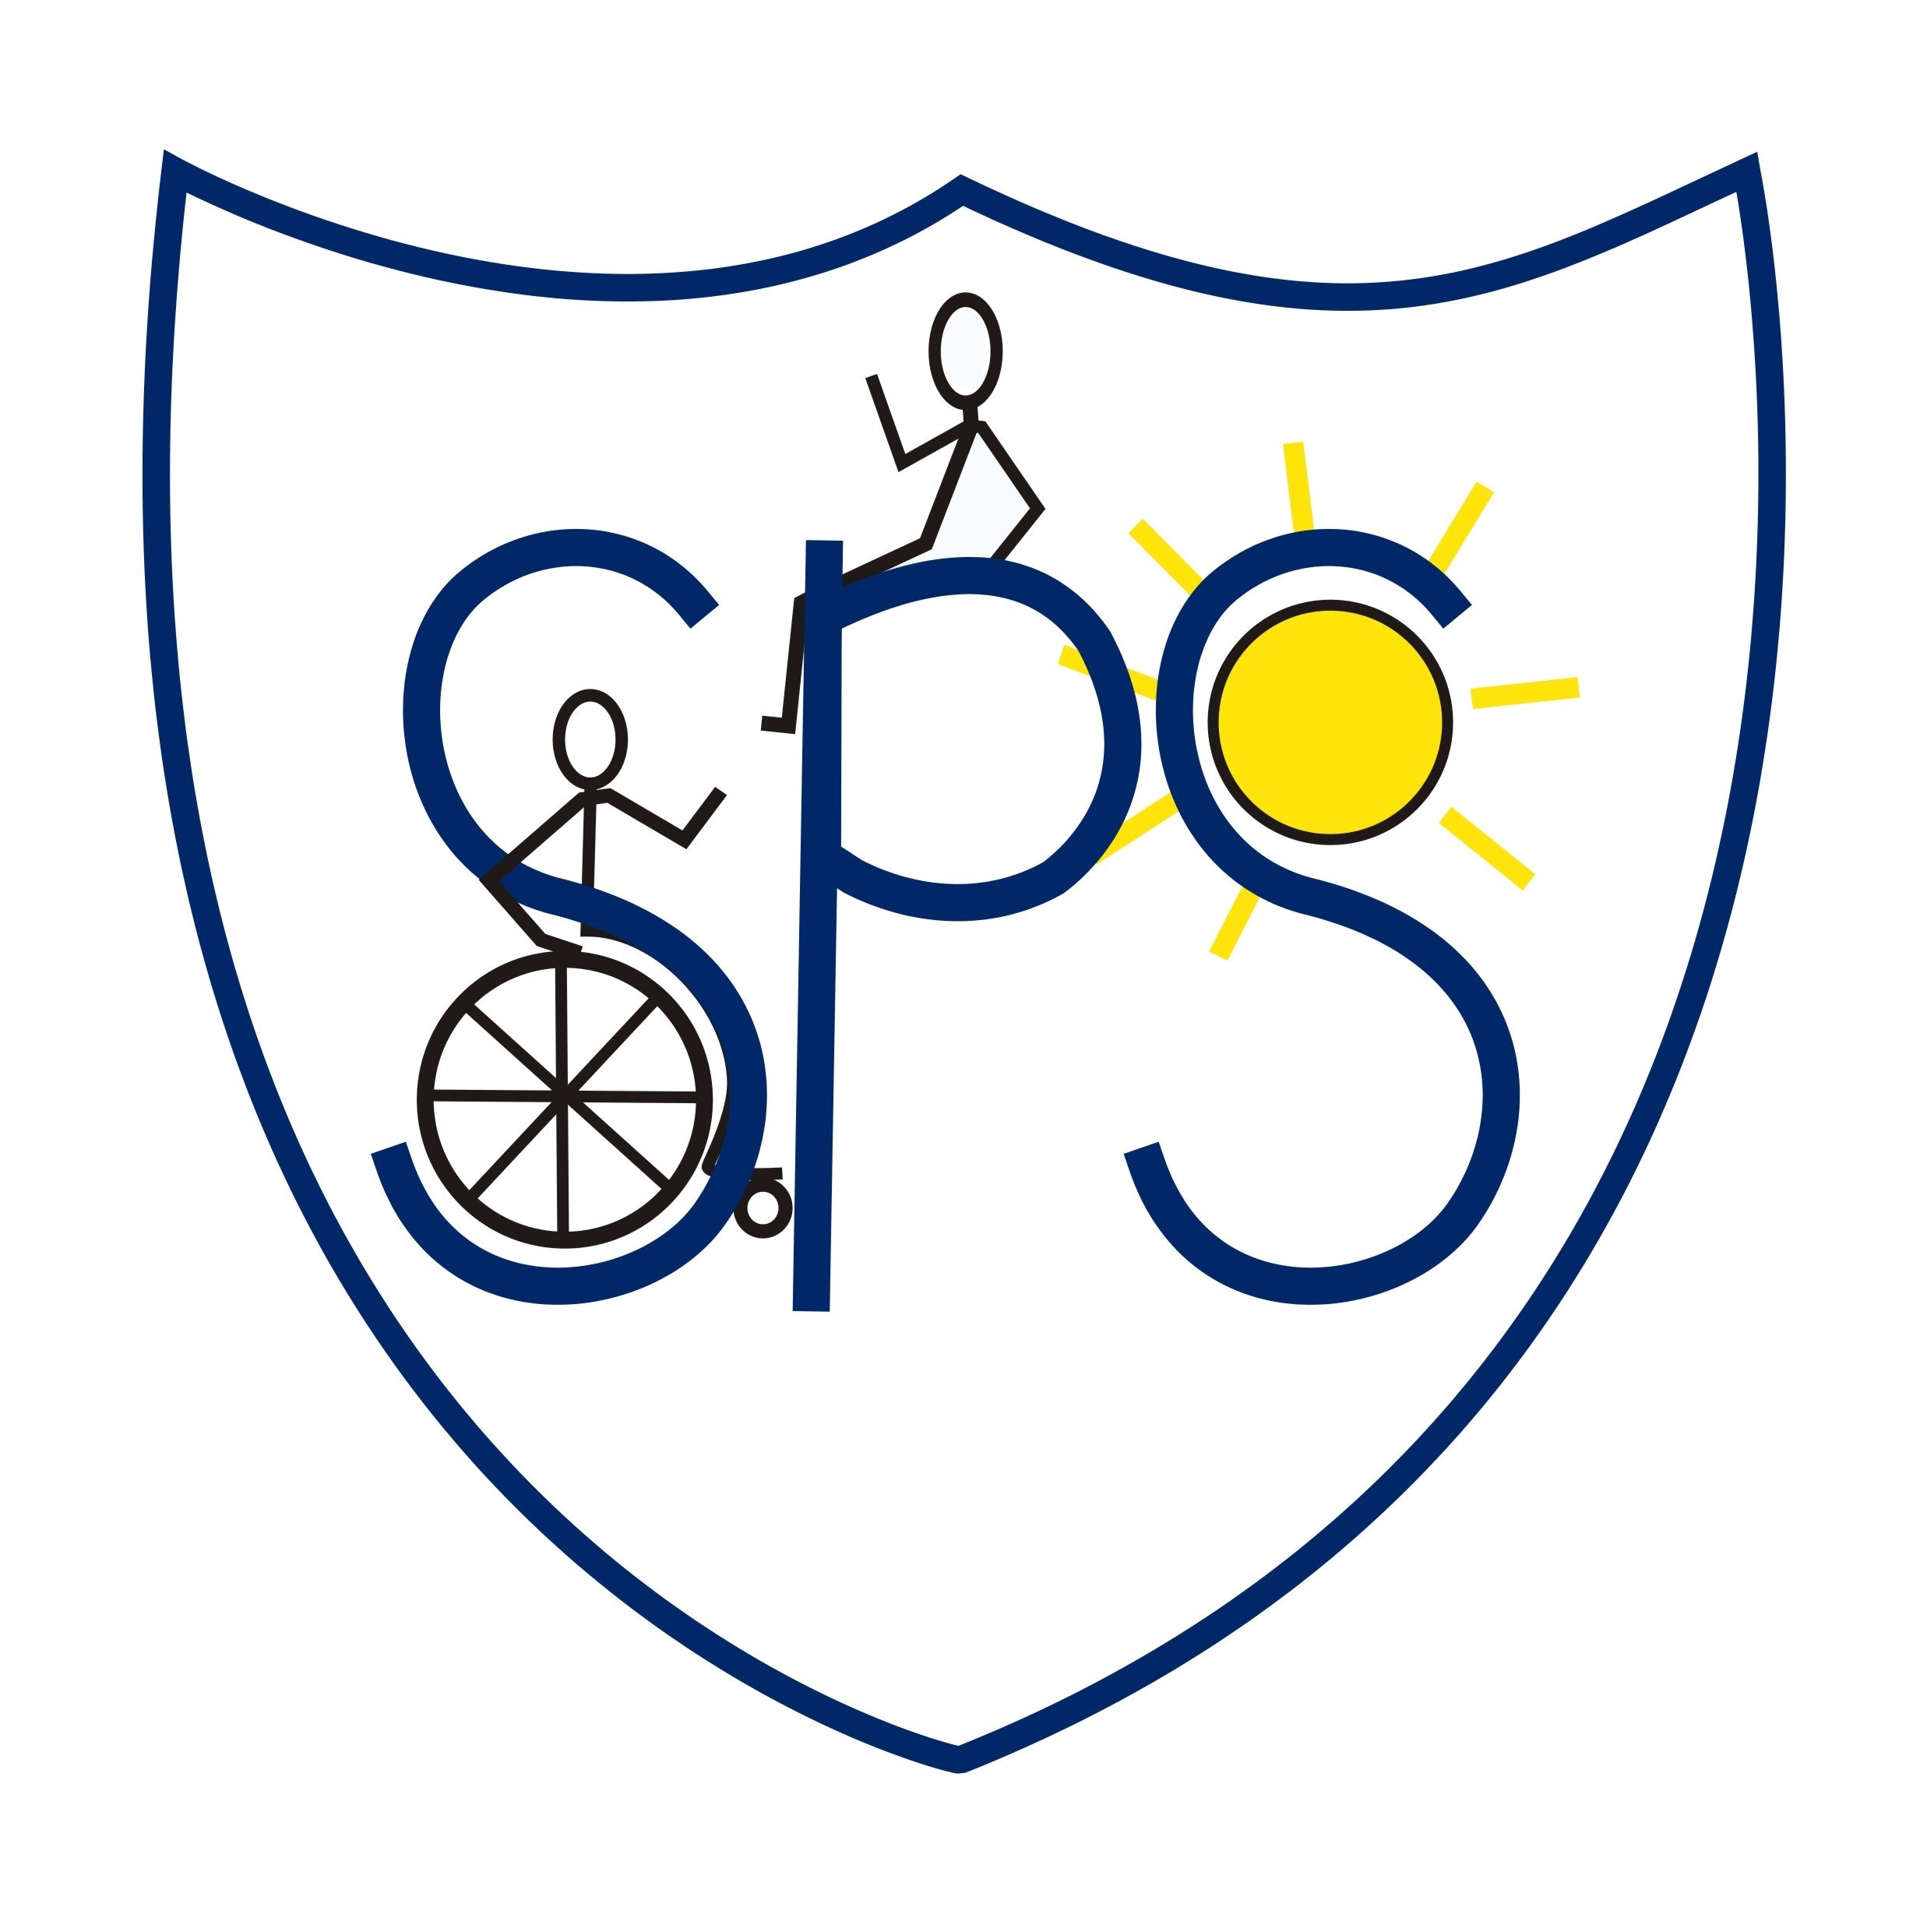 The official twitter page of Samuel Pepys School in St Neots. Providing specialist education, driven by our values of respect, positivity and purpose